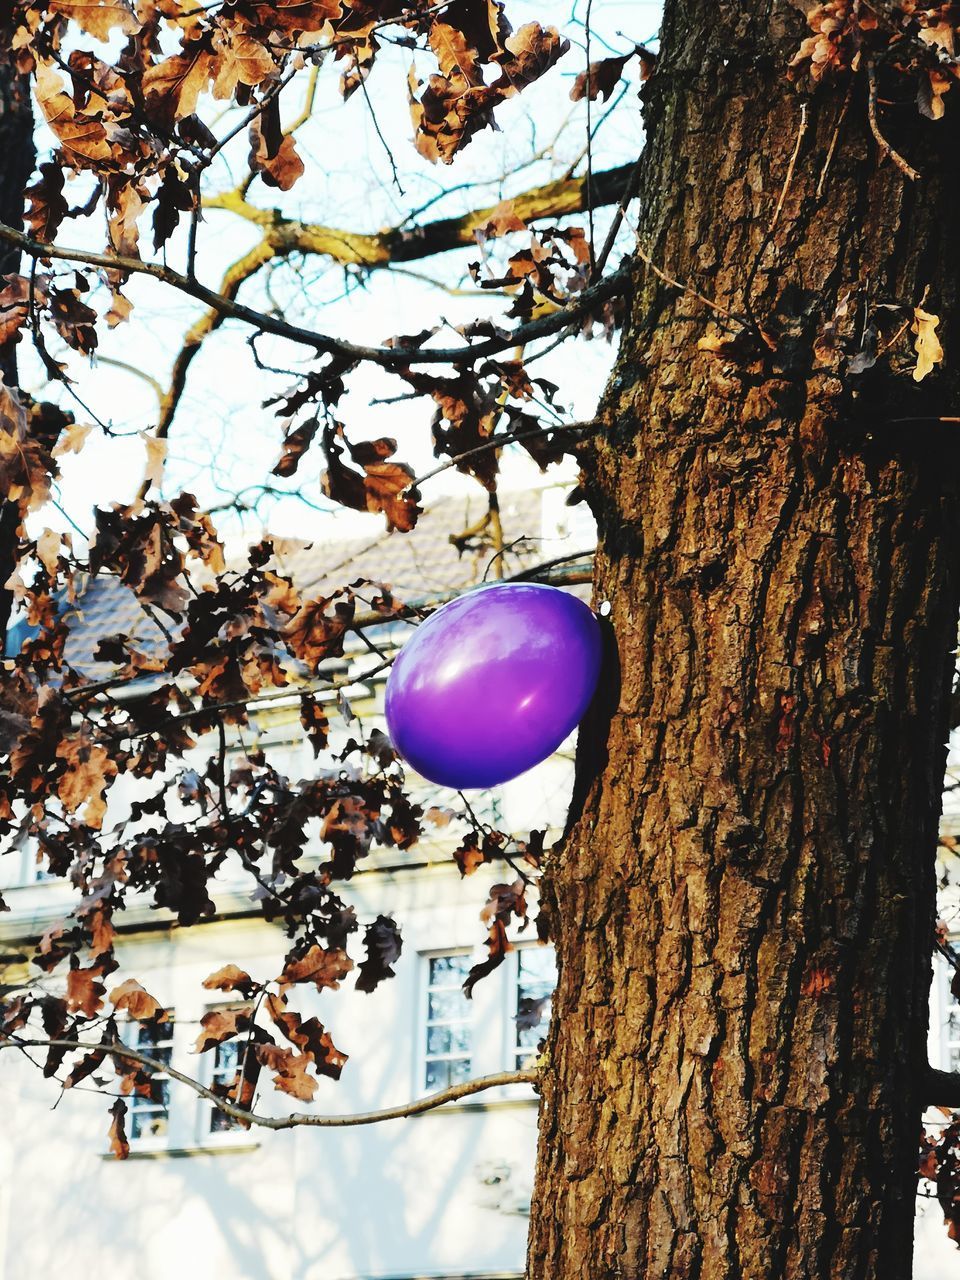 LOW ANGLE VIEW OF BALLOONS AGAINST TREES